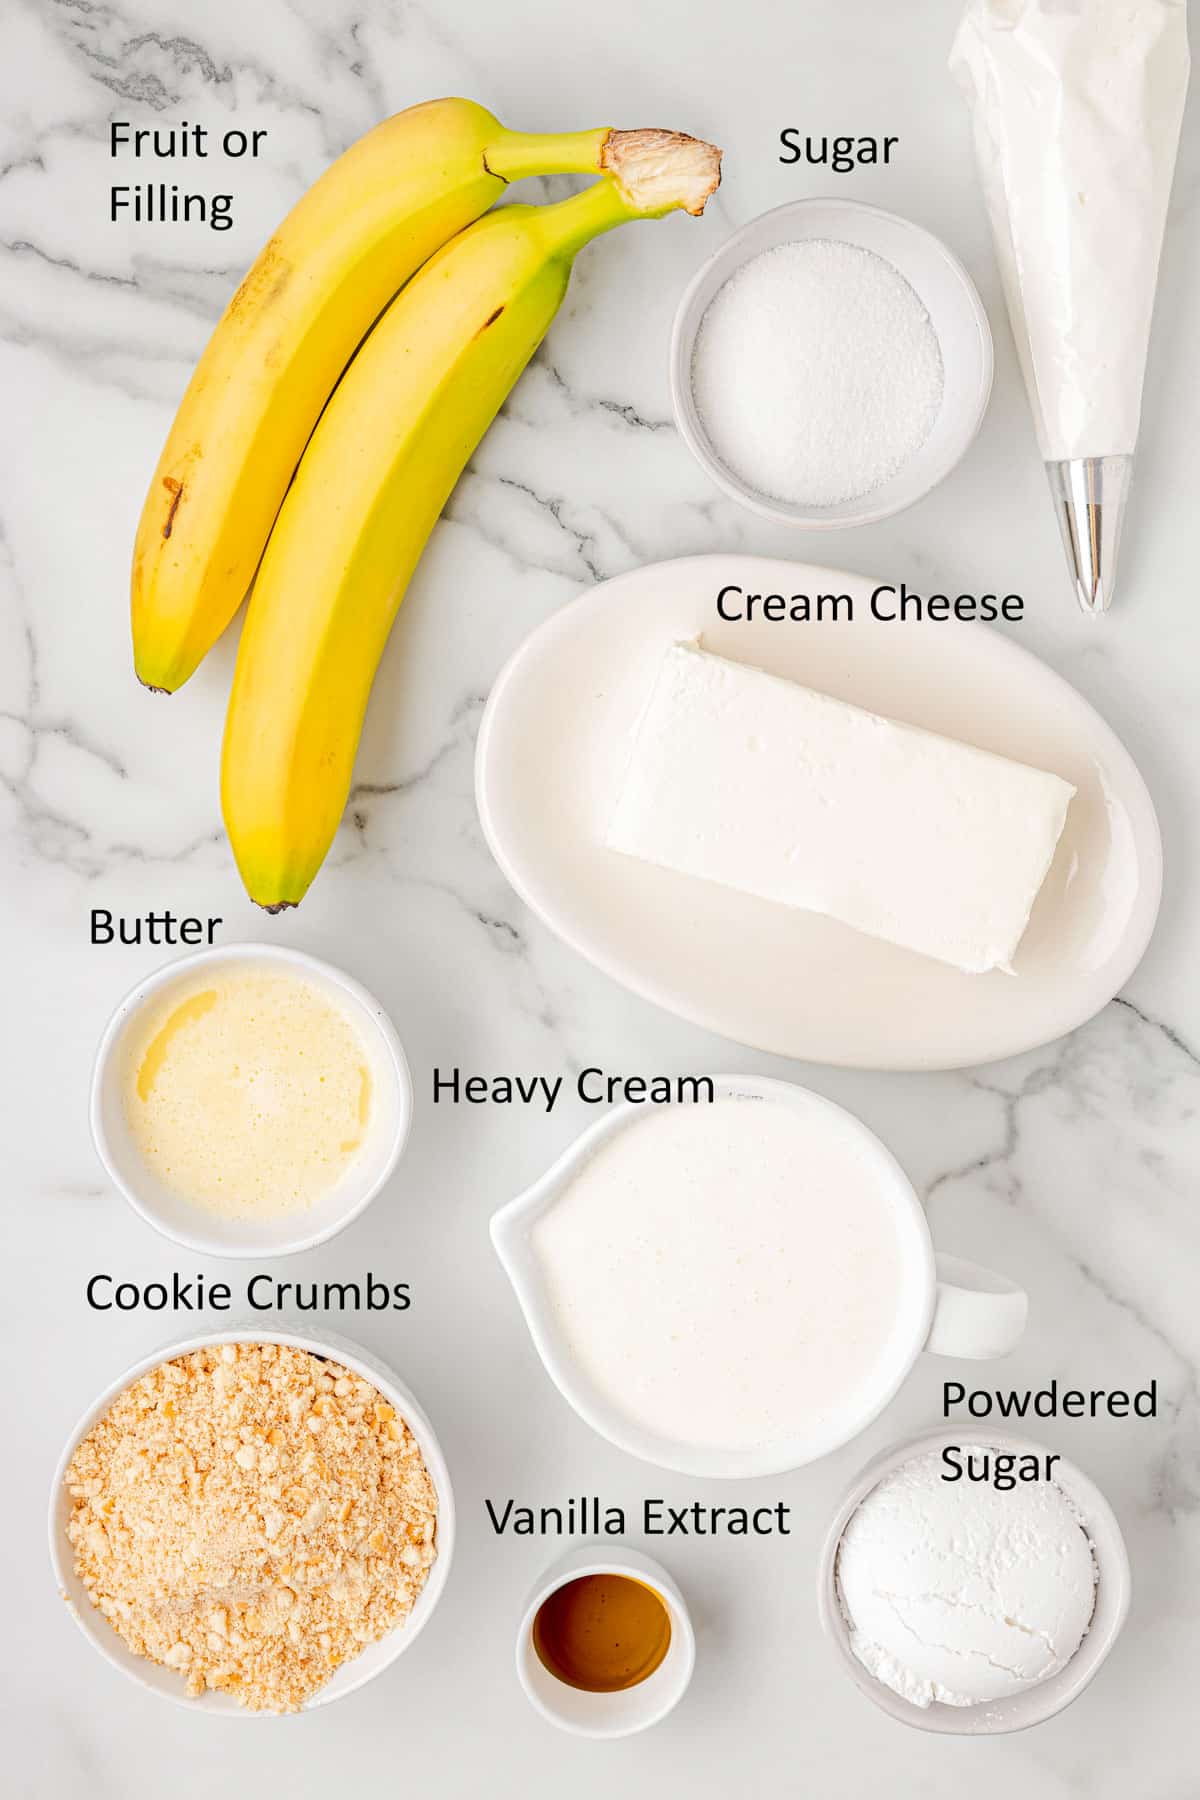 Overhead image showing labeled ingredients for cheesecake in a jar.